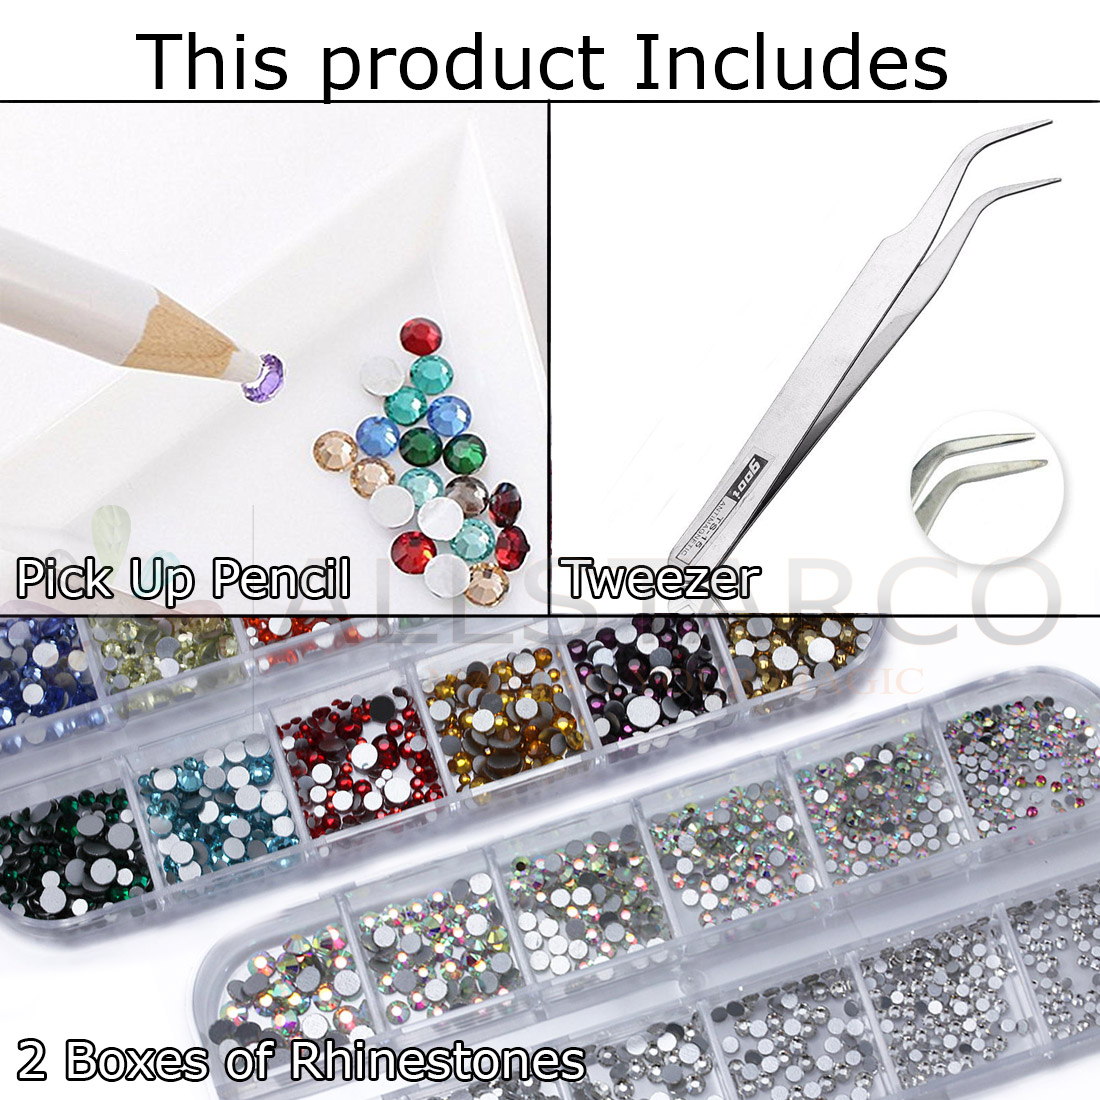 allstarco nail art kit assorted colors ab crystal clear rhinestones tiny gems crafts